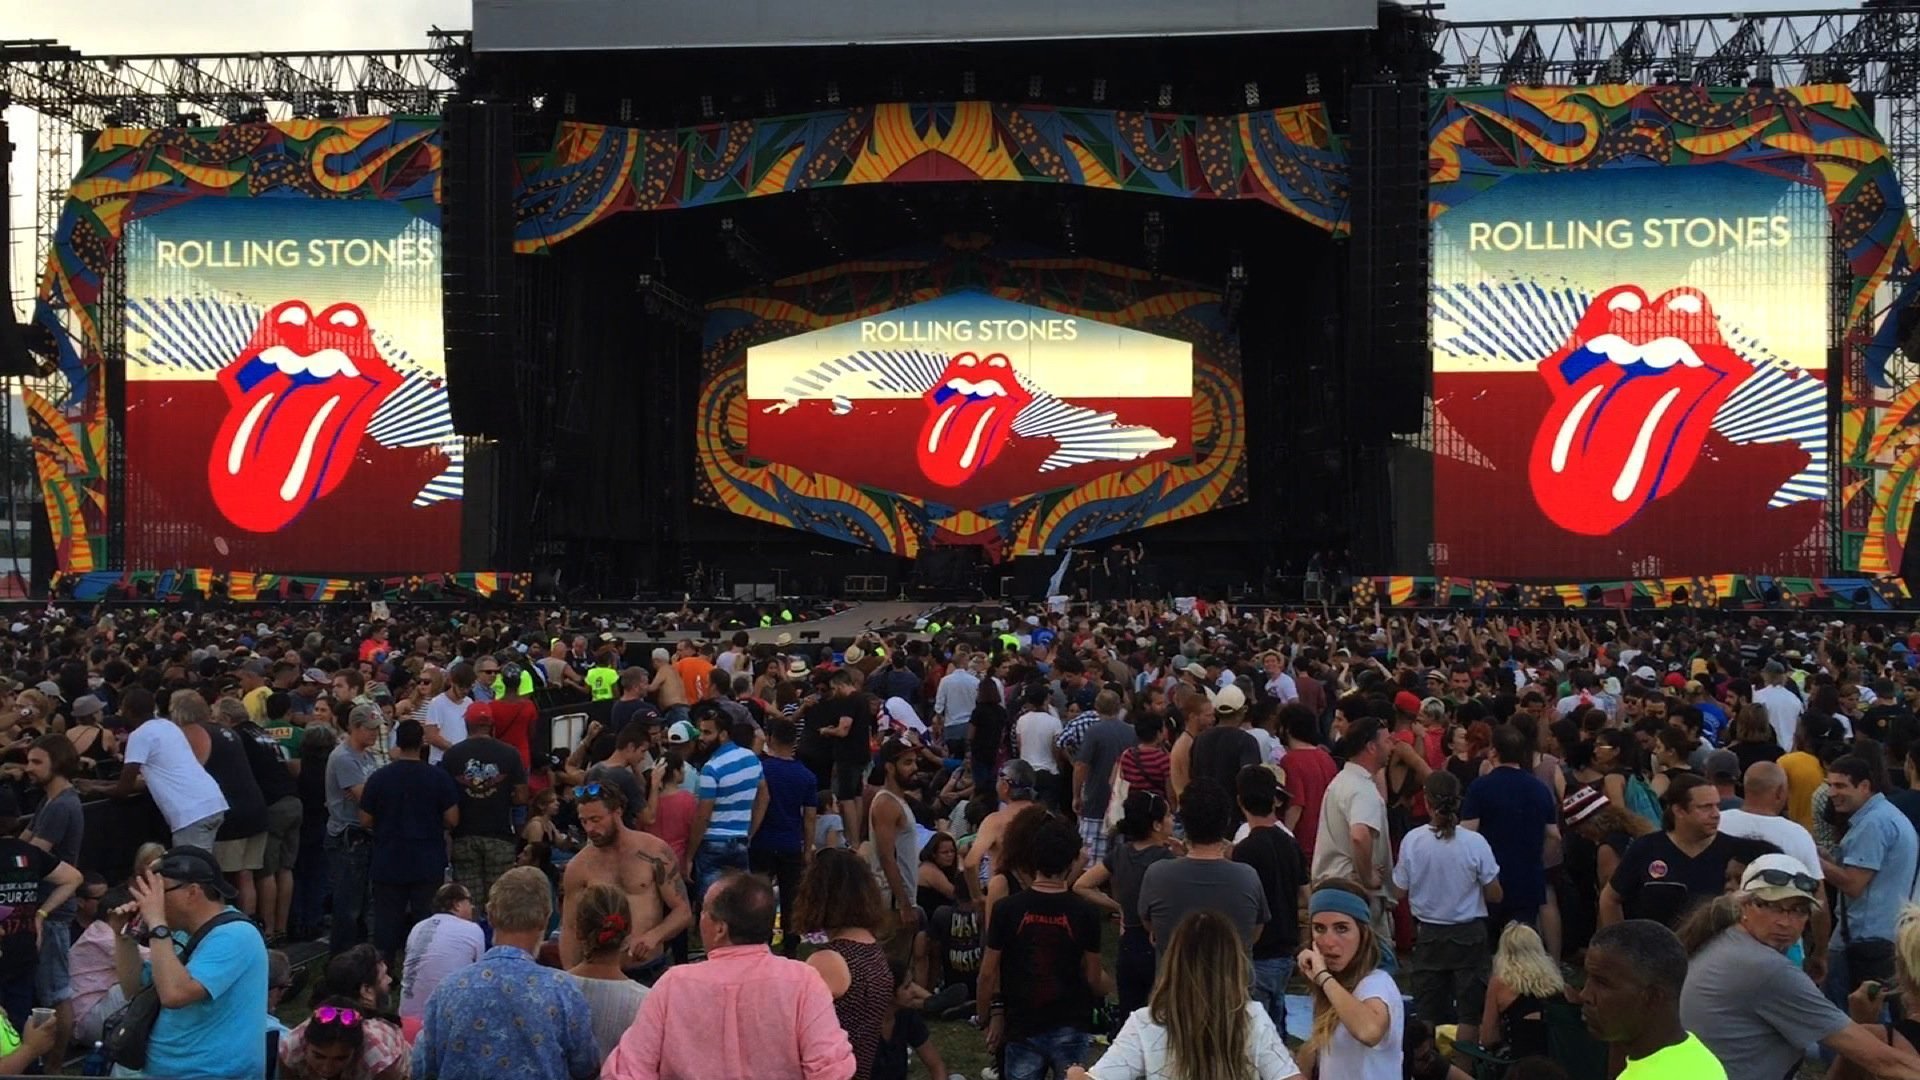 The Rolling Stones are going back to their blues roots. The band on Thursday confirmed the upcoming release of their first studio album in over a decade, titled "Blue & Lonesome."

The record is being touted as the band's "return to the blues," which a press release announcing the album called "the heart and soul of The Rolling Stones."